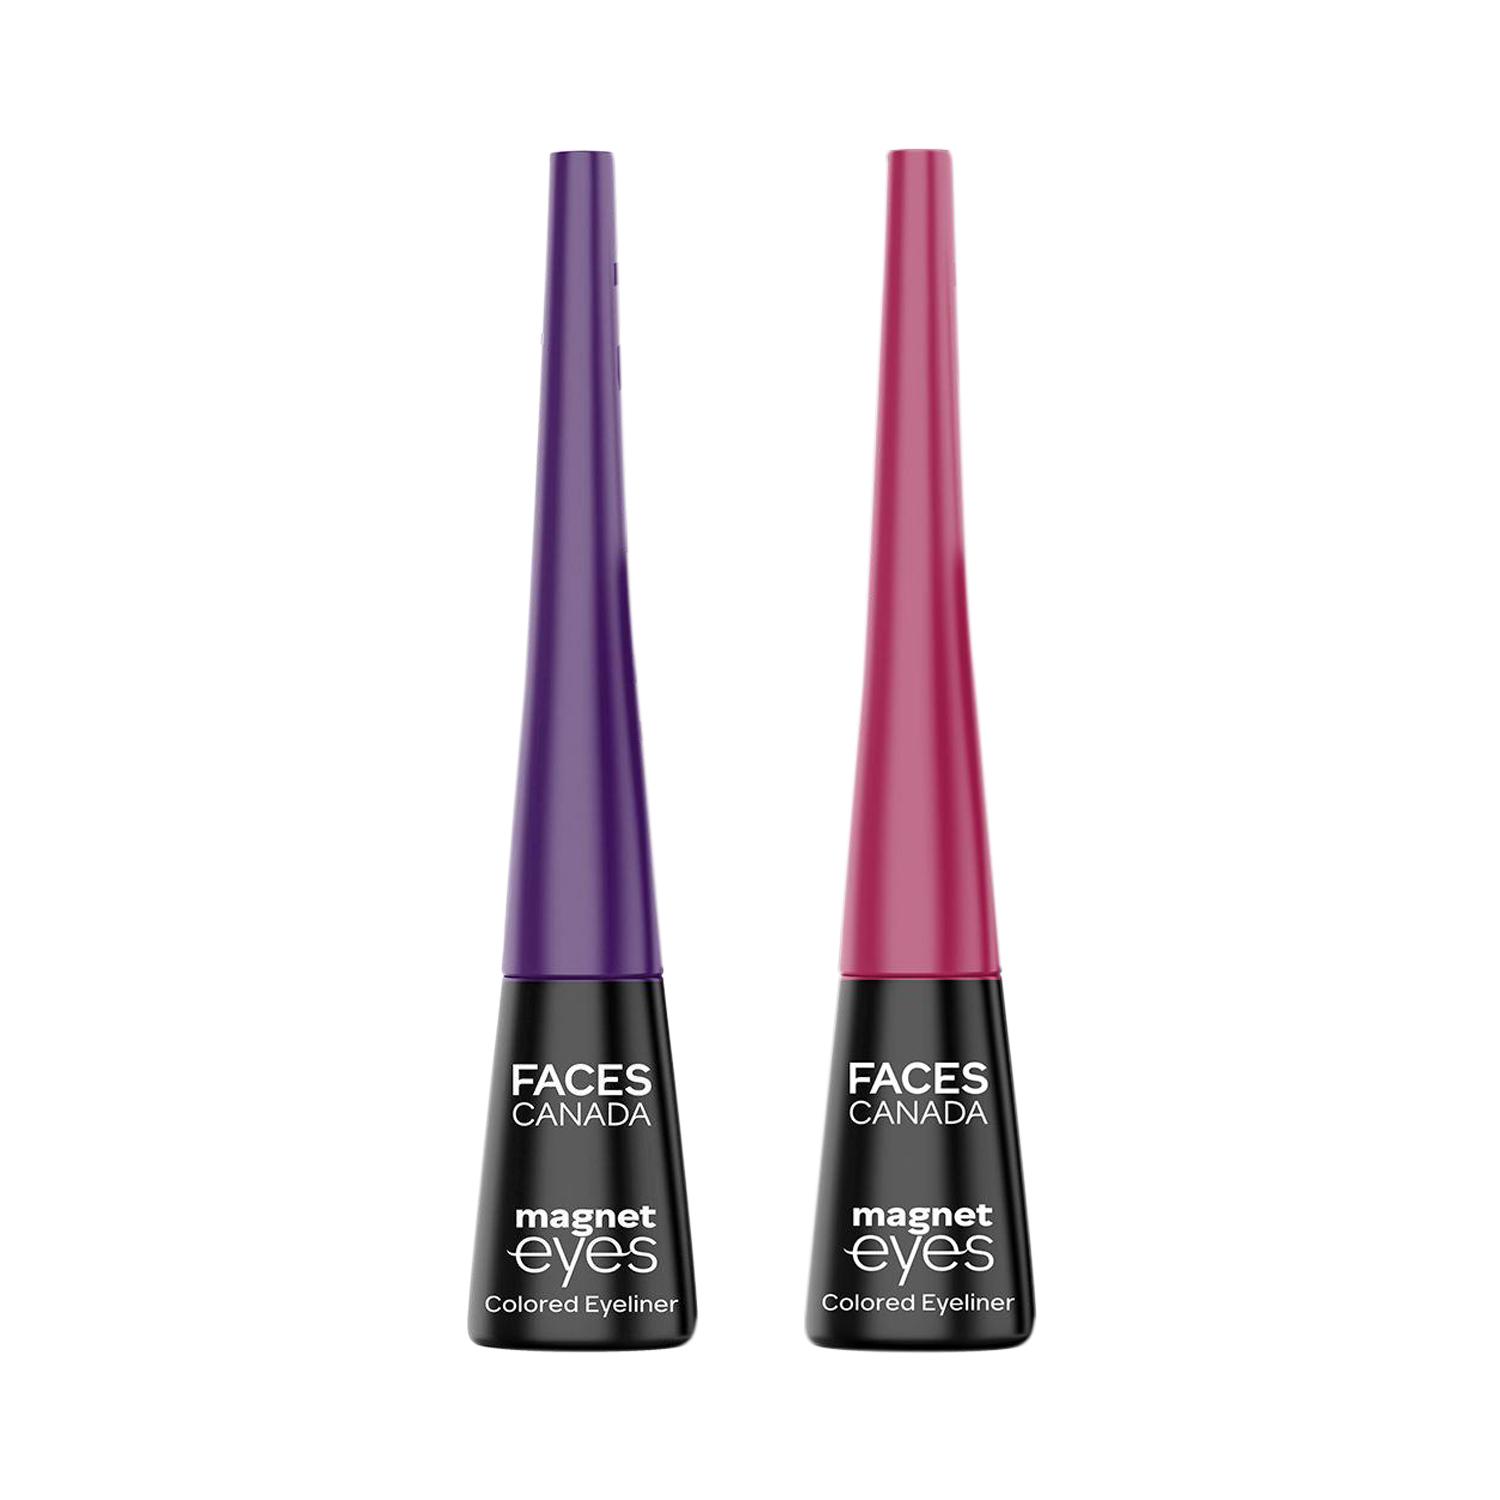 Faces Canada | Faces Canada Magneteyes Color Eyeliners of Dramatic Purple and Graceful Burgundy Combo (Pack of 2)